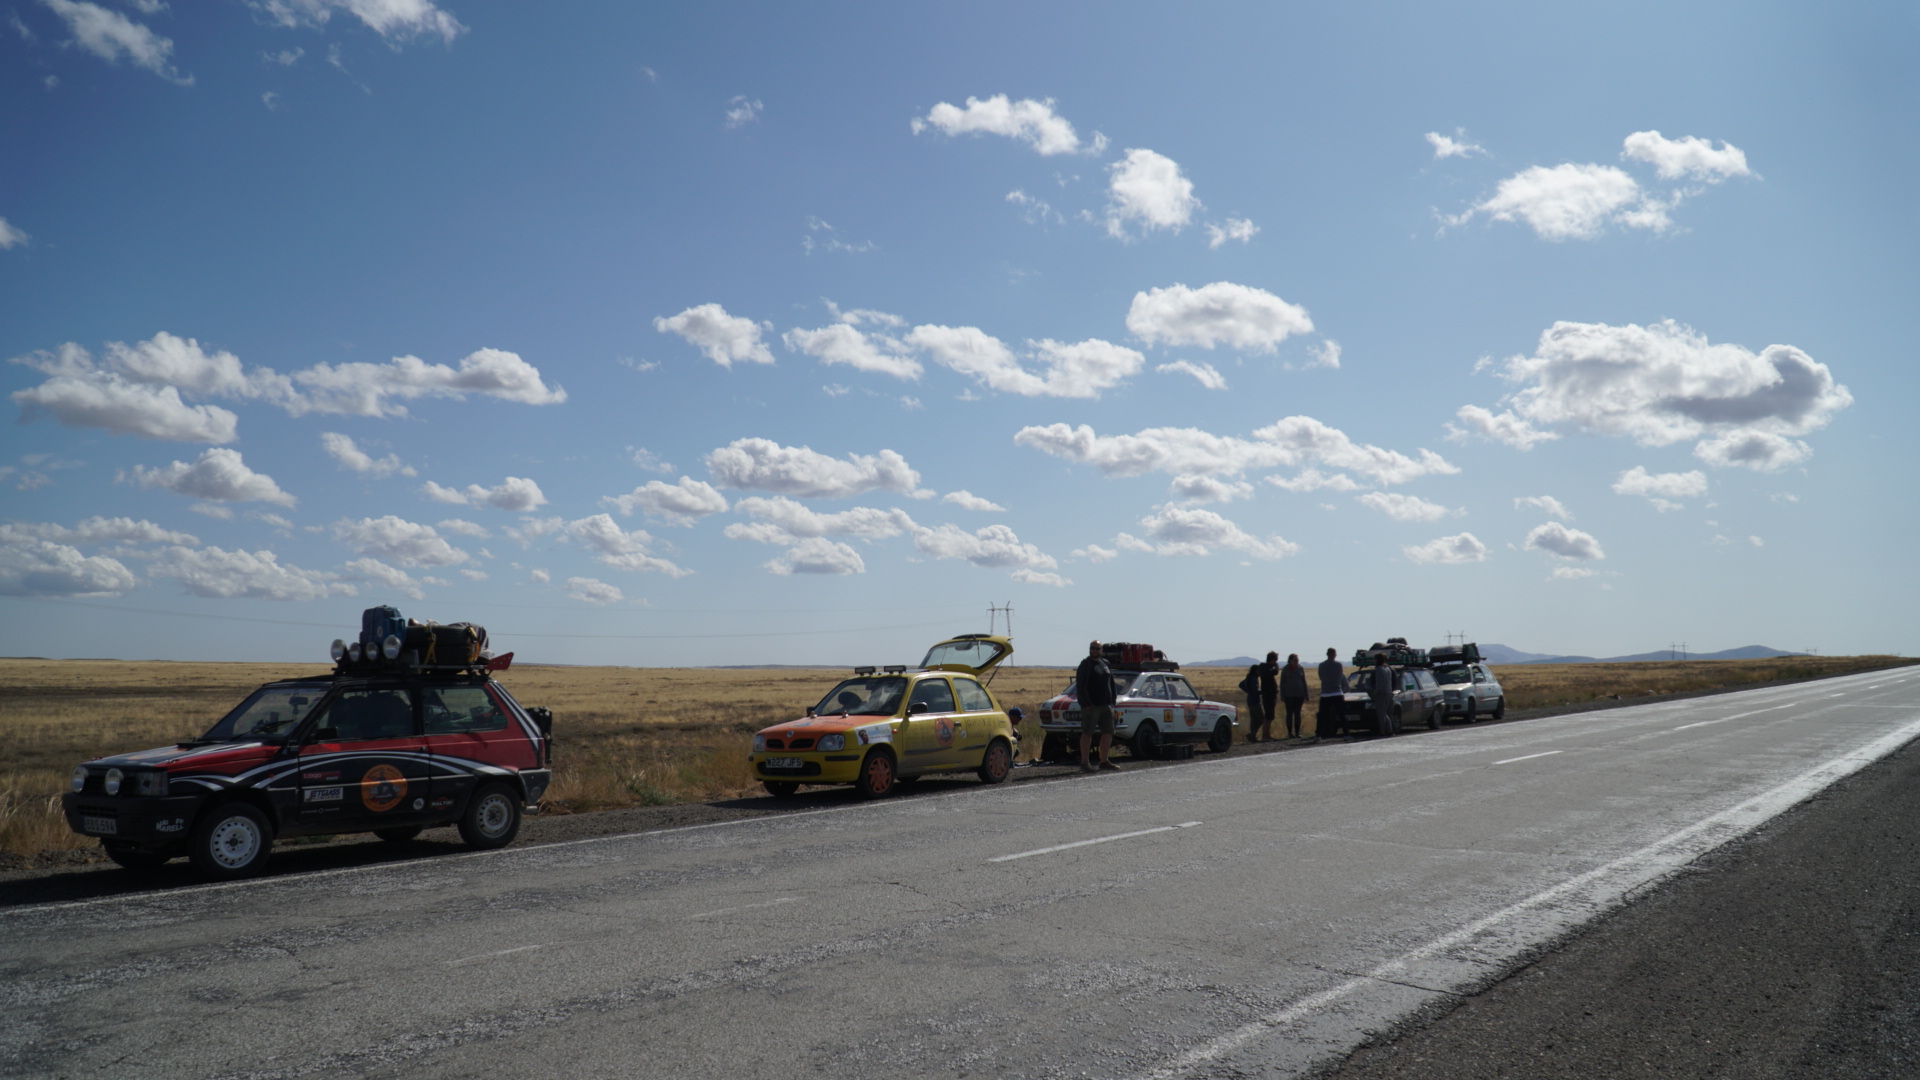 Mongol rally: More teams on the way to the Russian border